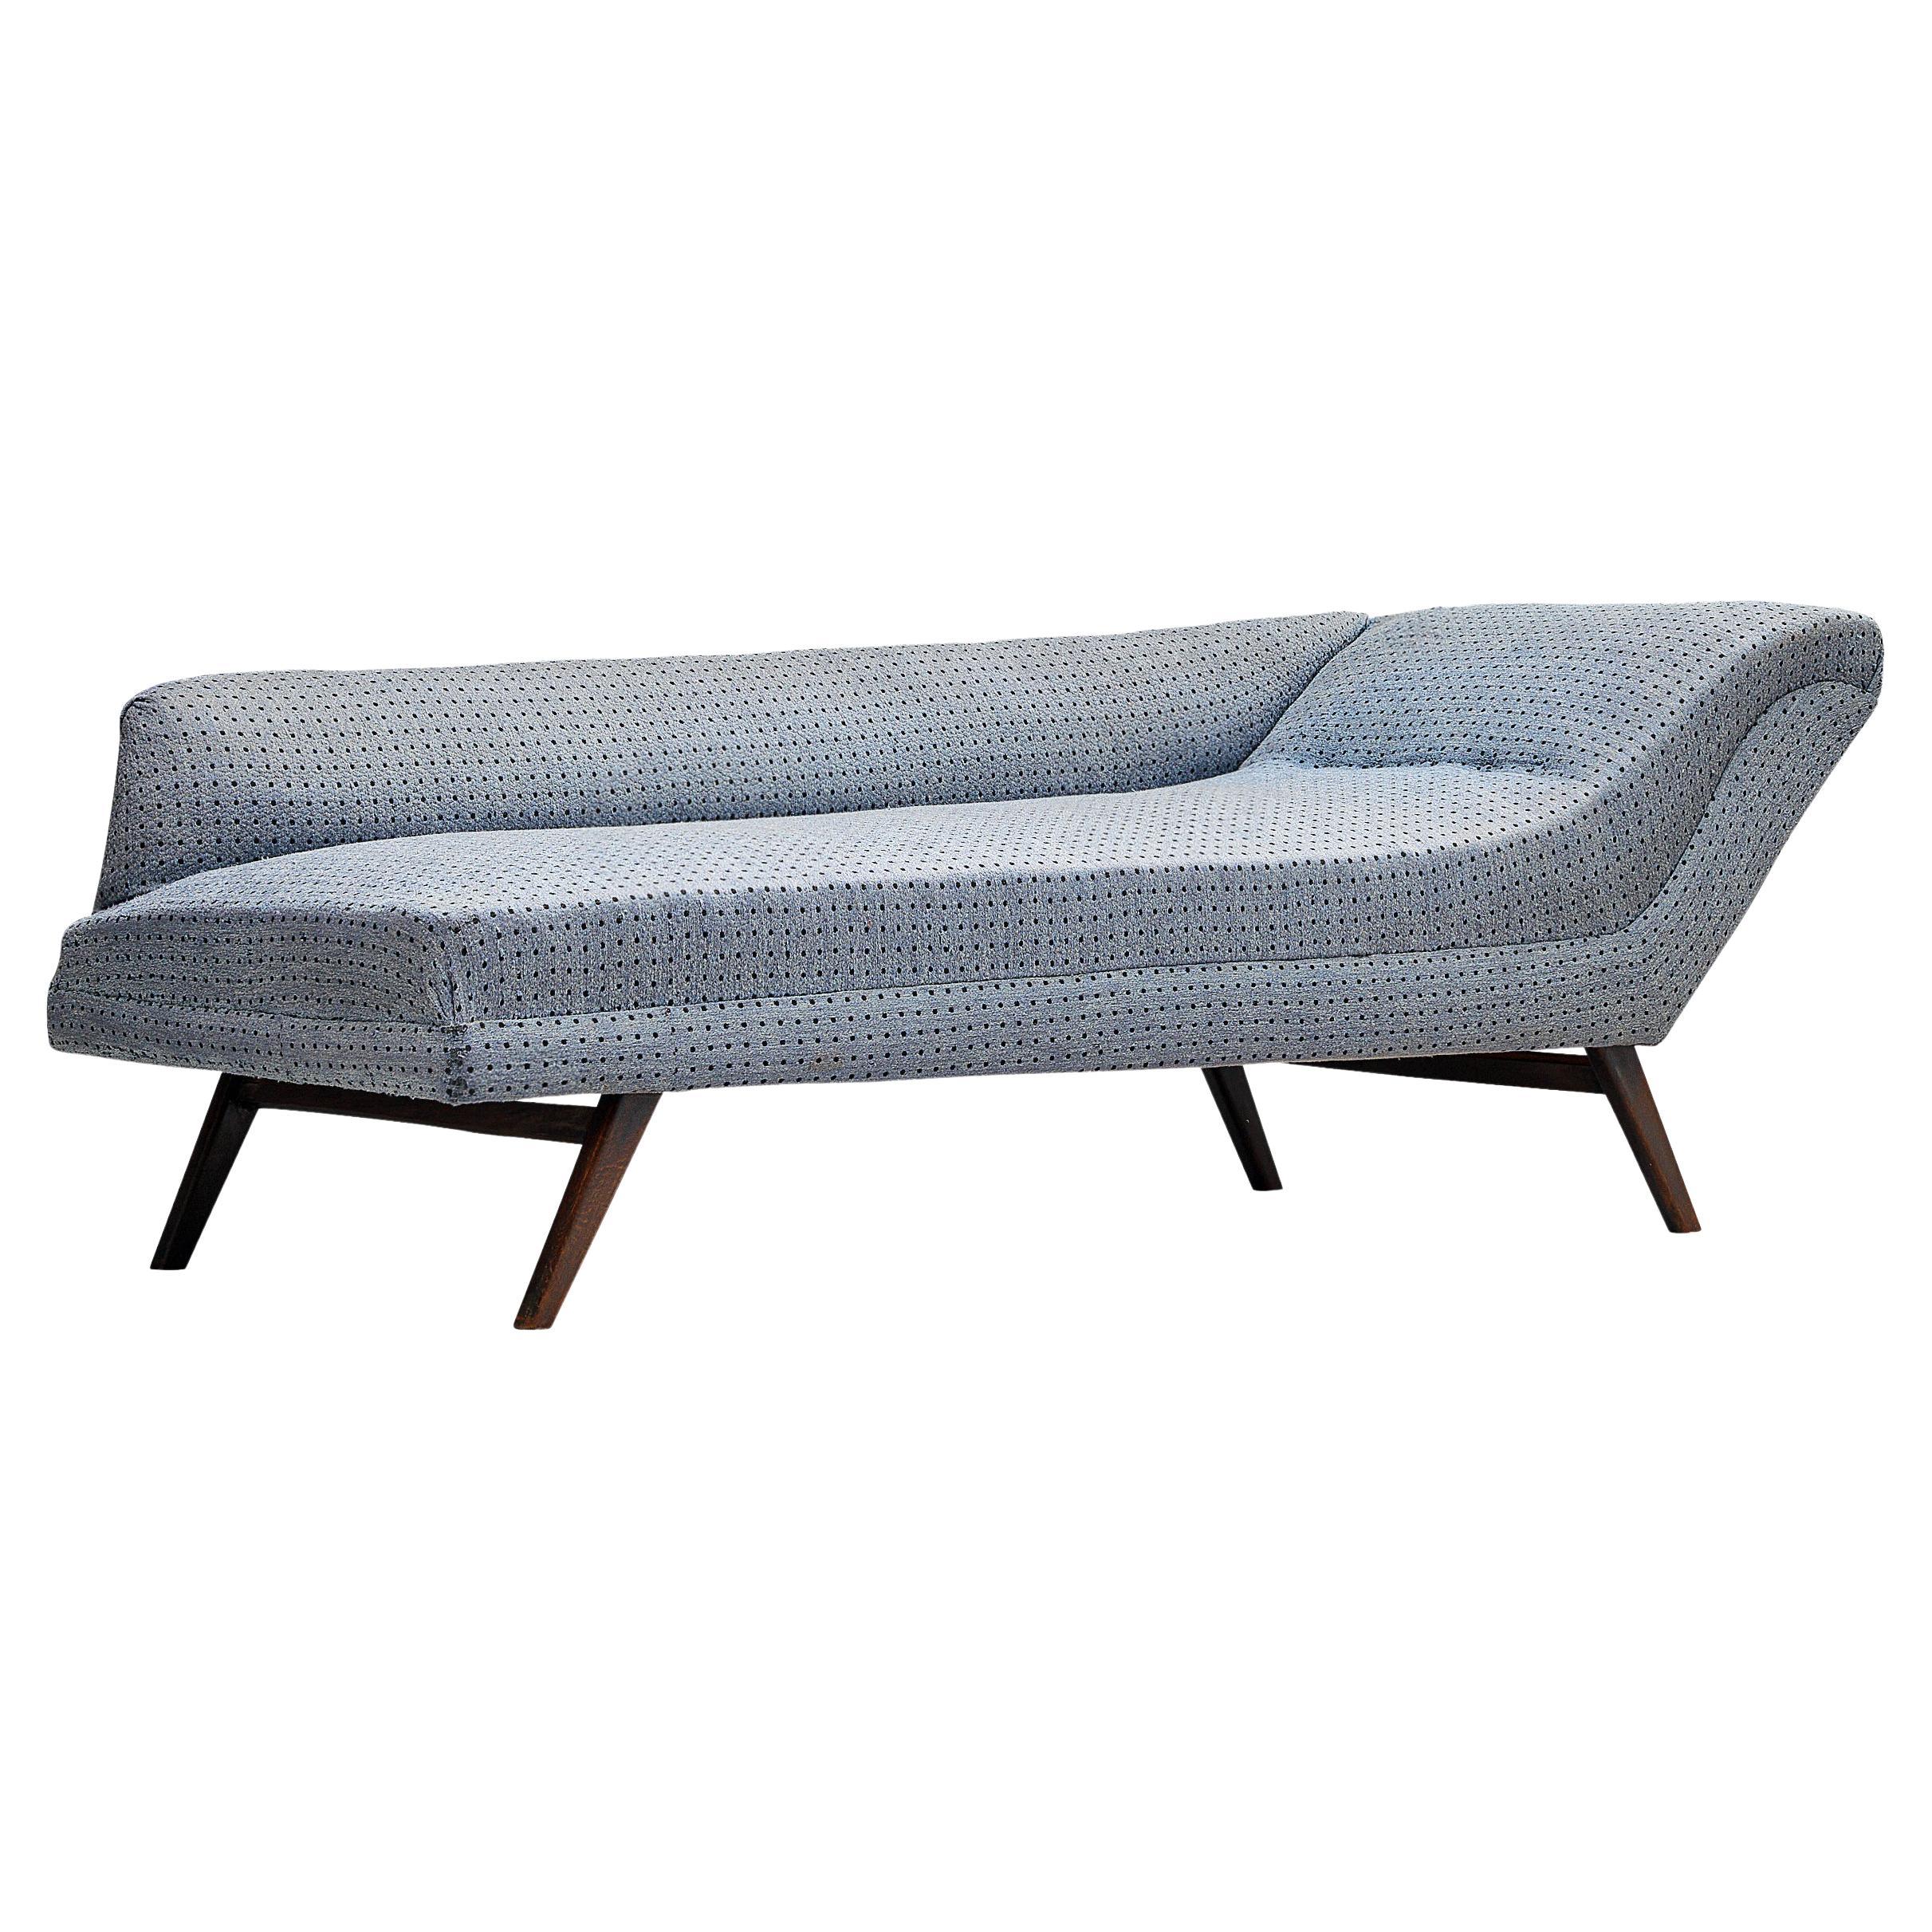 Danish Chaise Longue in Ice Blue Dotted Upholstery